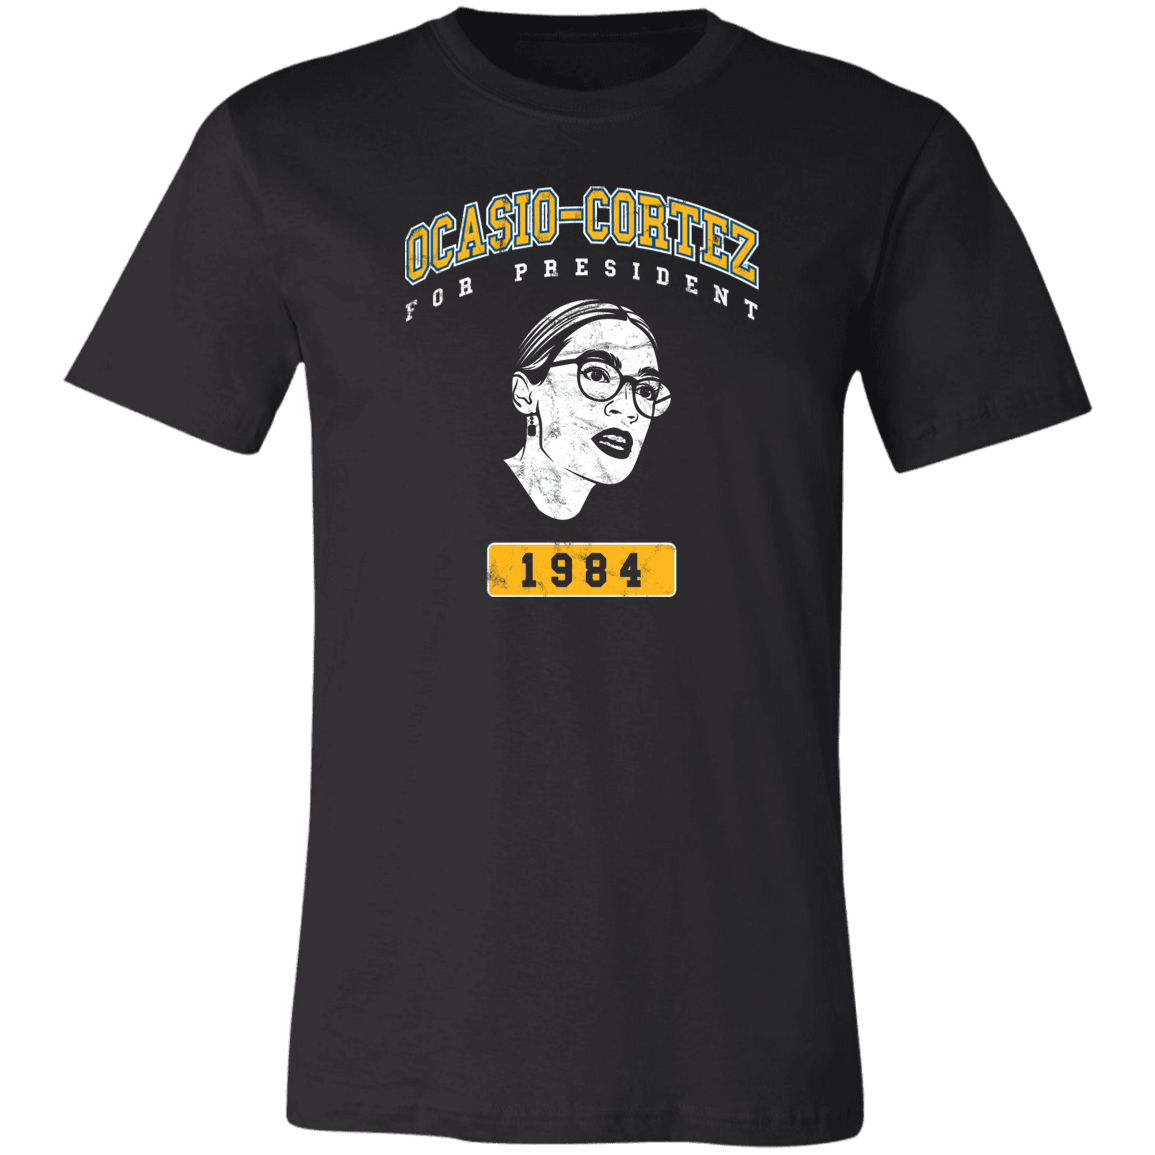 Designs by MyUtopia Shout Out:Ocasio-Cortez For President Unisex Jersey Short-Sleeve T-Shirt,Black / X-Small,T-Shirts